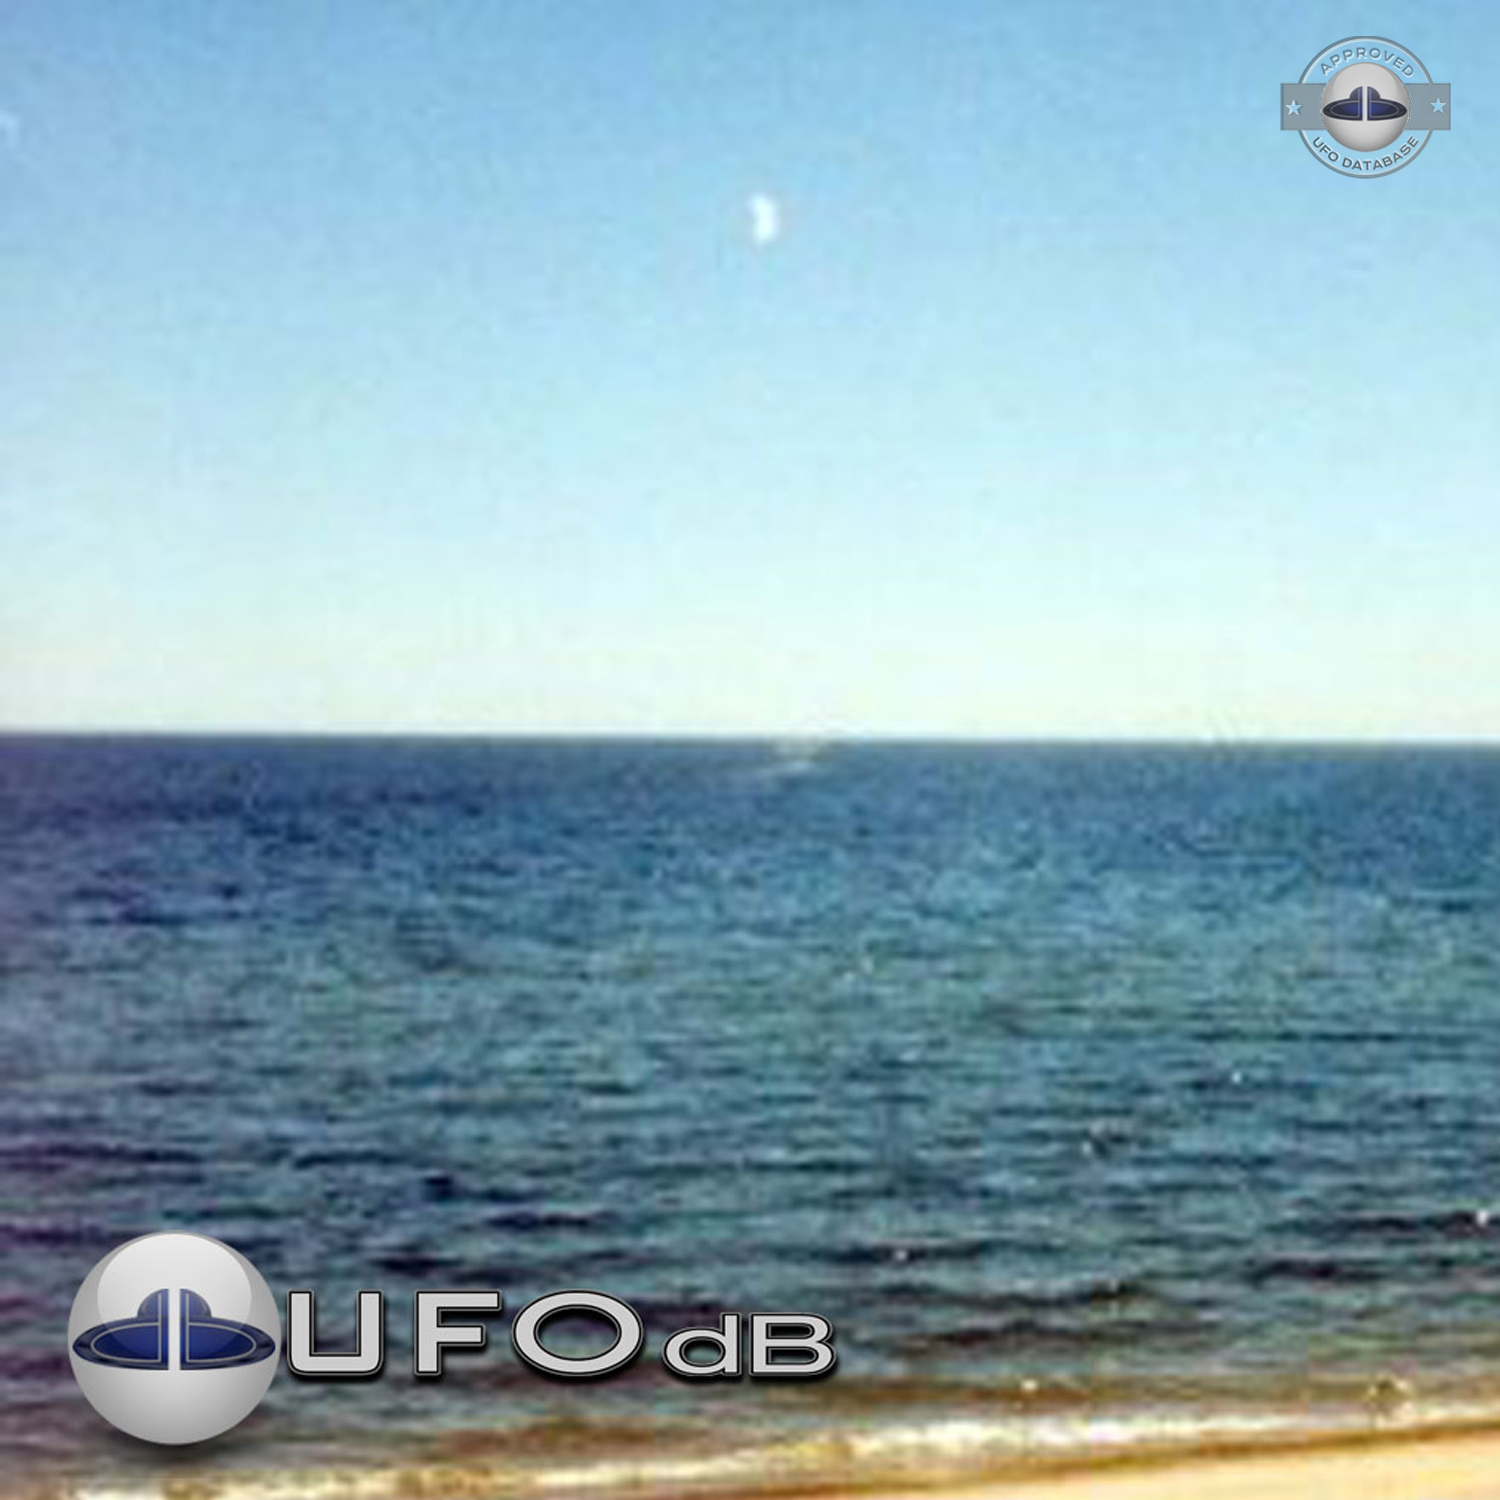 UFO flying over dark blue water near the shore of Lake Michigan USA UFO Picture #97-2